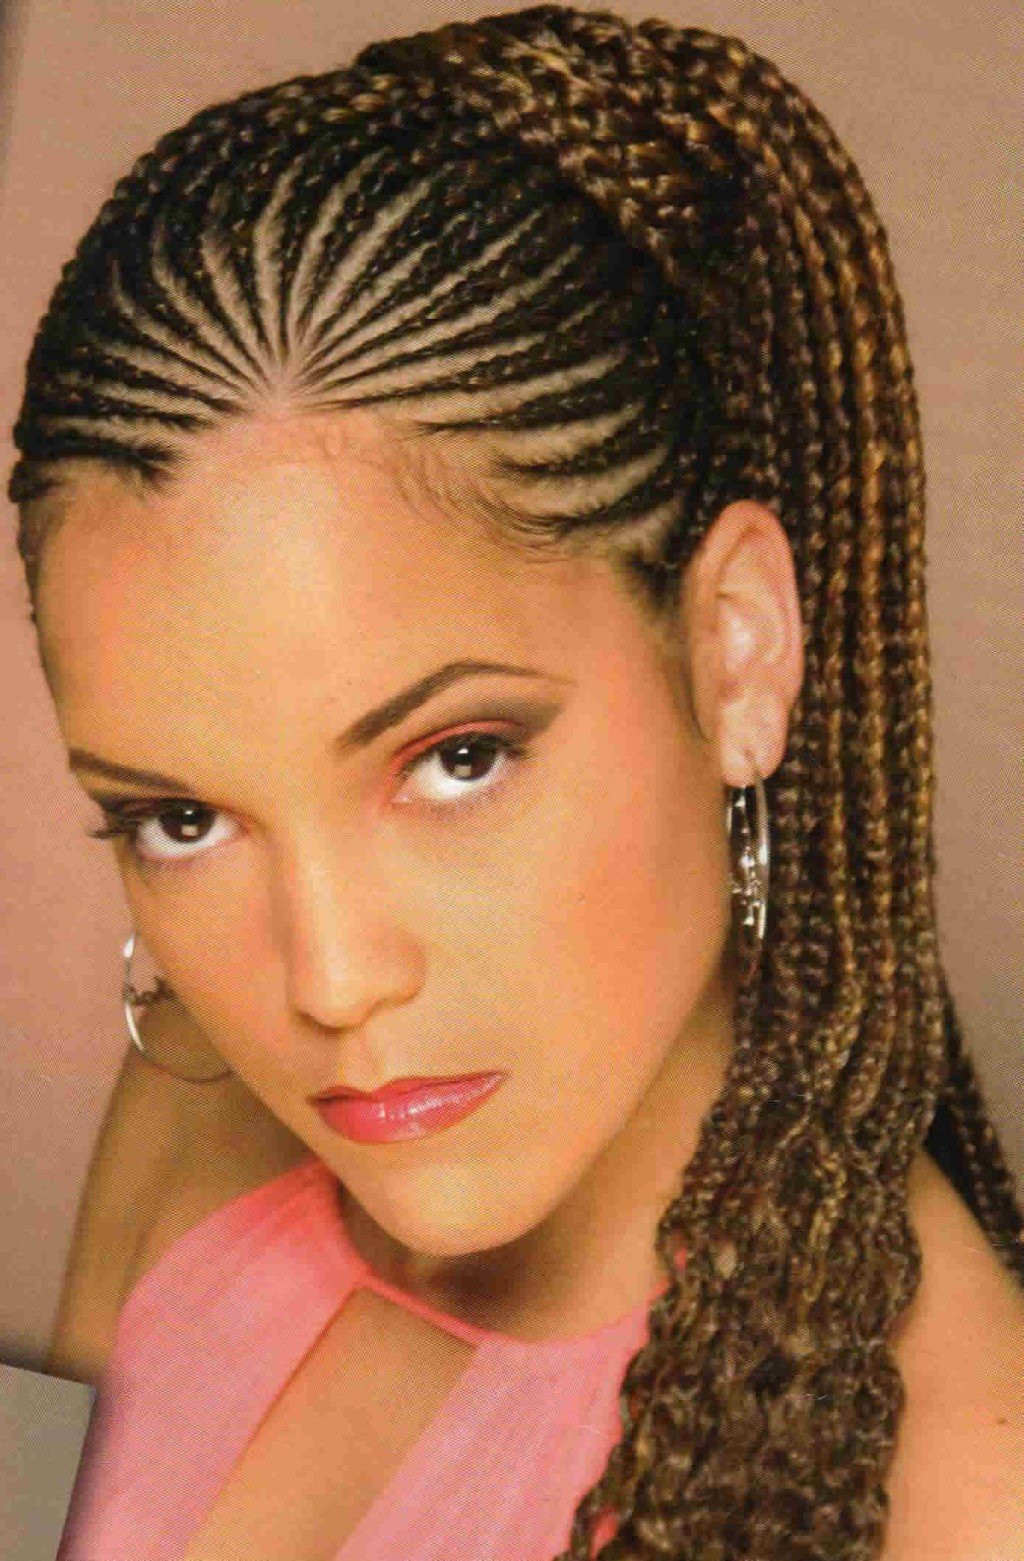 Black Braid Hairstyles Pictures
 Hair Braiding Styles Guide for Black Women